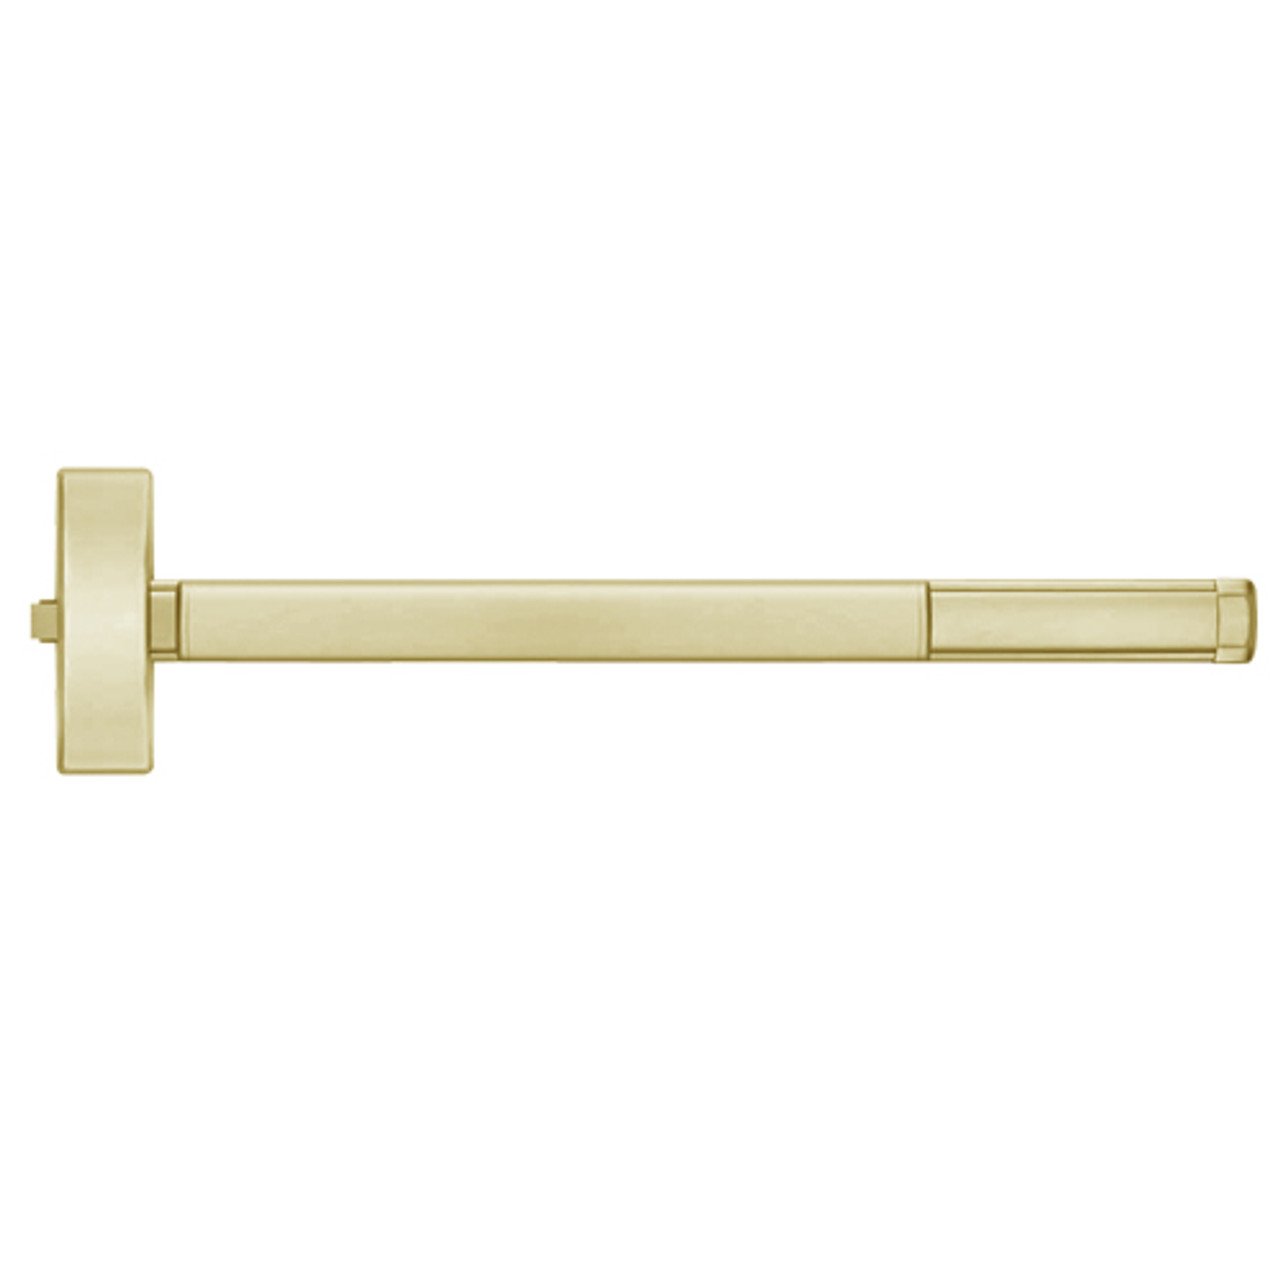 TSFL2101-606-36 PHI 2100 Series Fire Rated Apex Rim Exit Device with Touchbar Monitoring Switch Prepped for Cover Plate in Satin Brass Finish